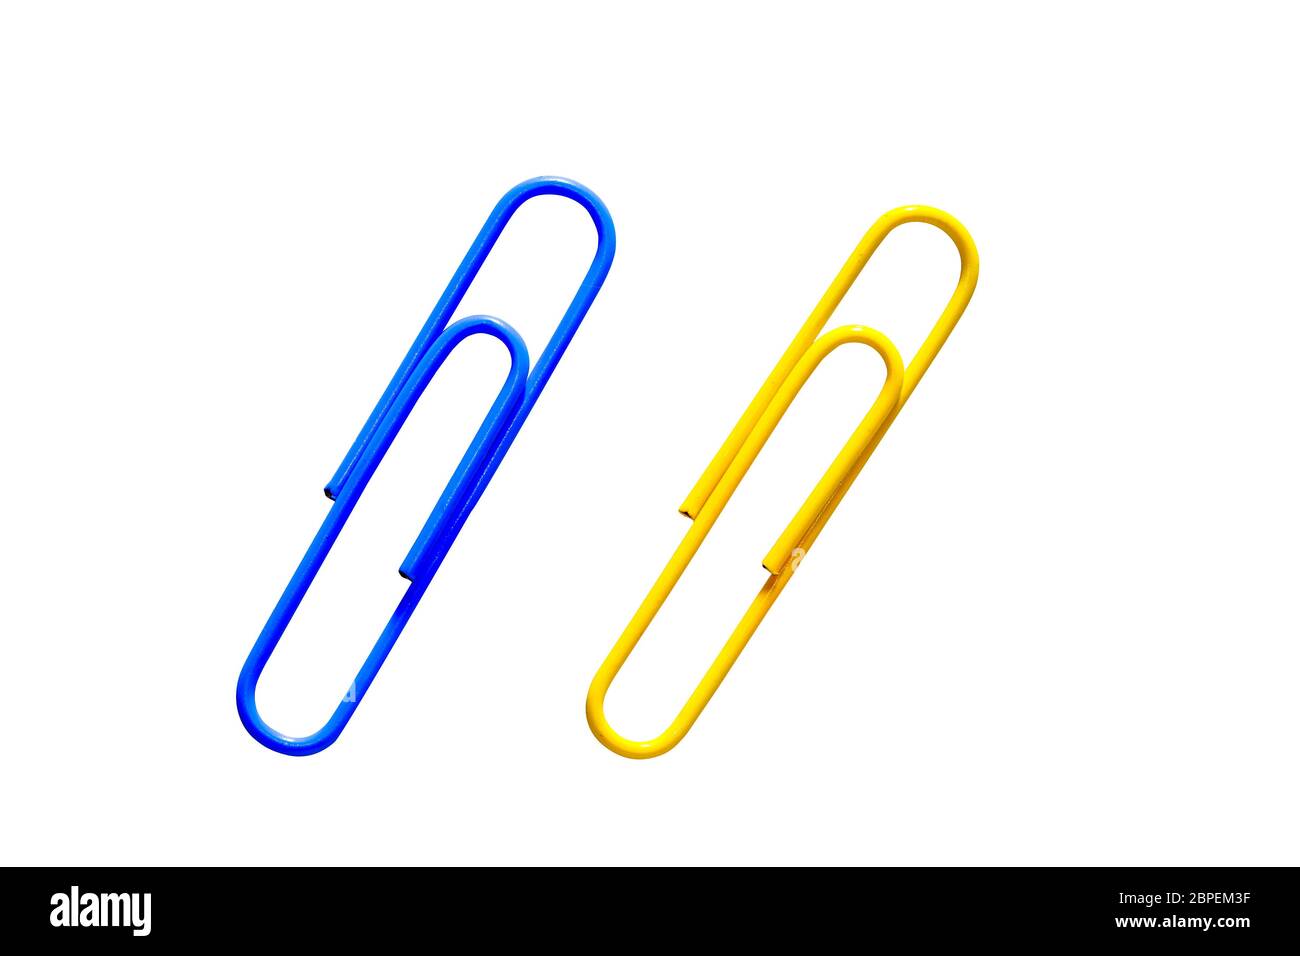 Blue and yellow paper clips, A tool used for office, isolated on white background Stock Photo